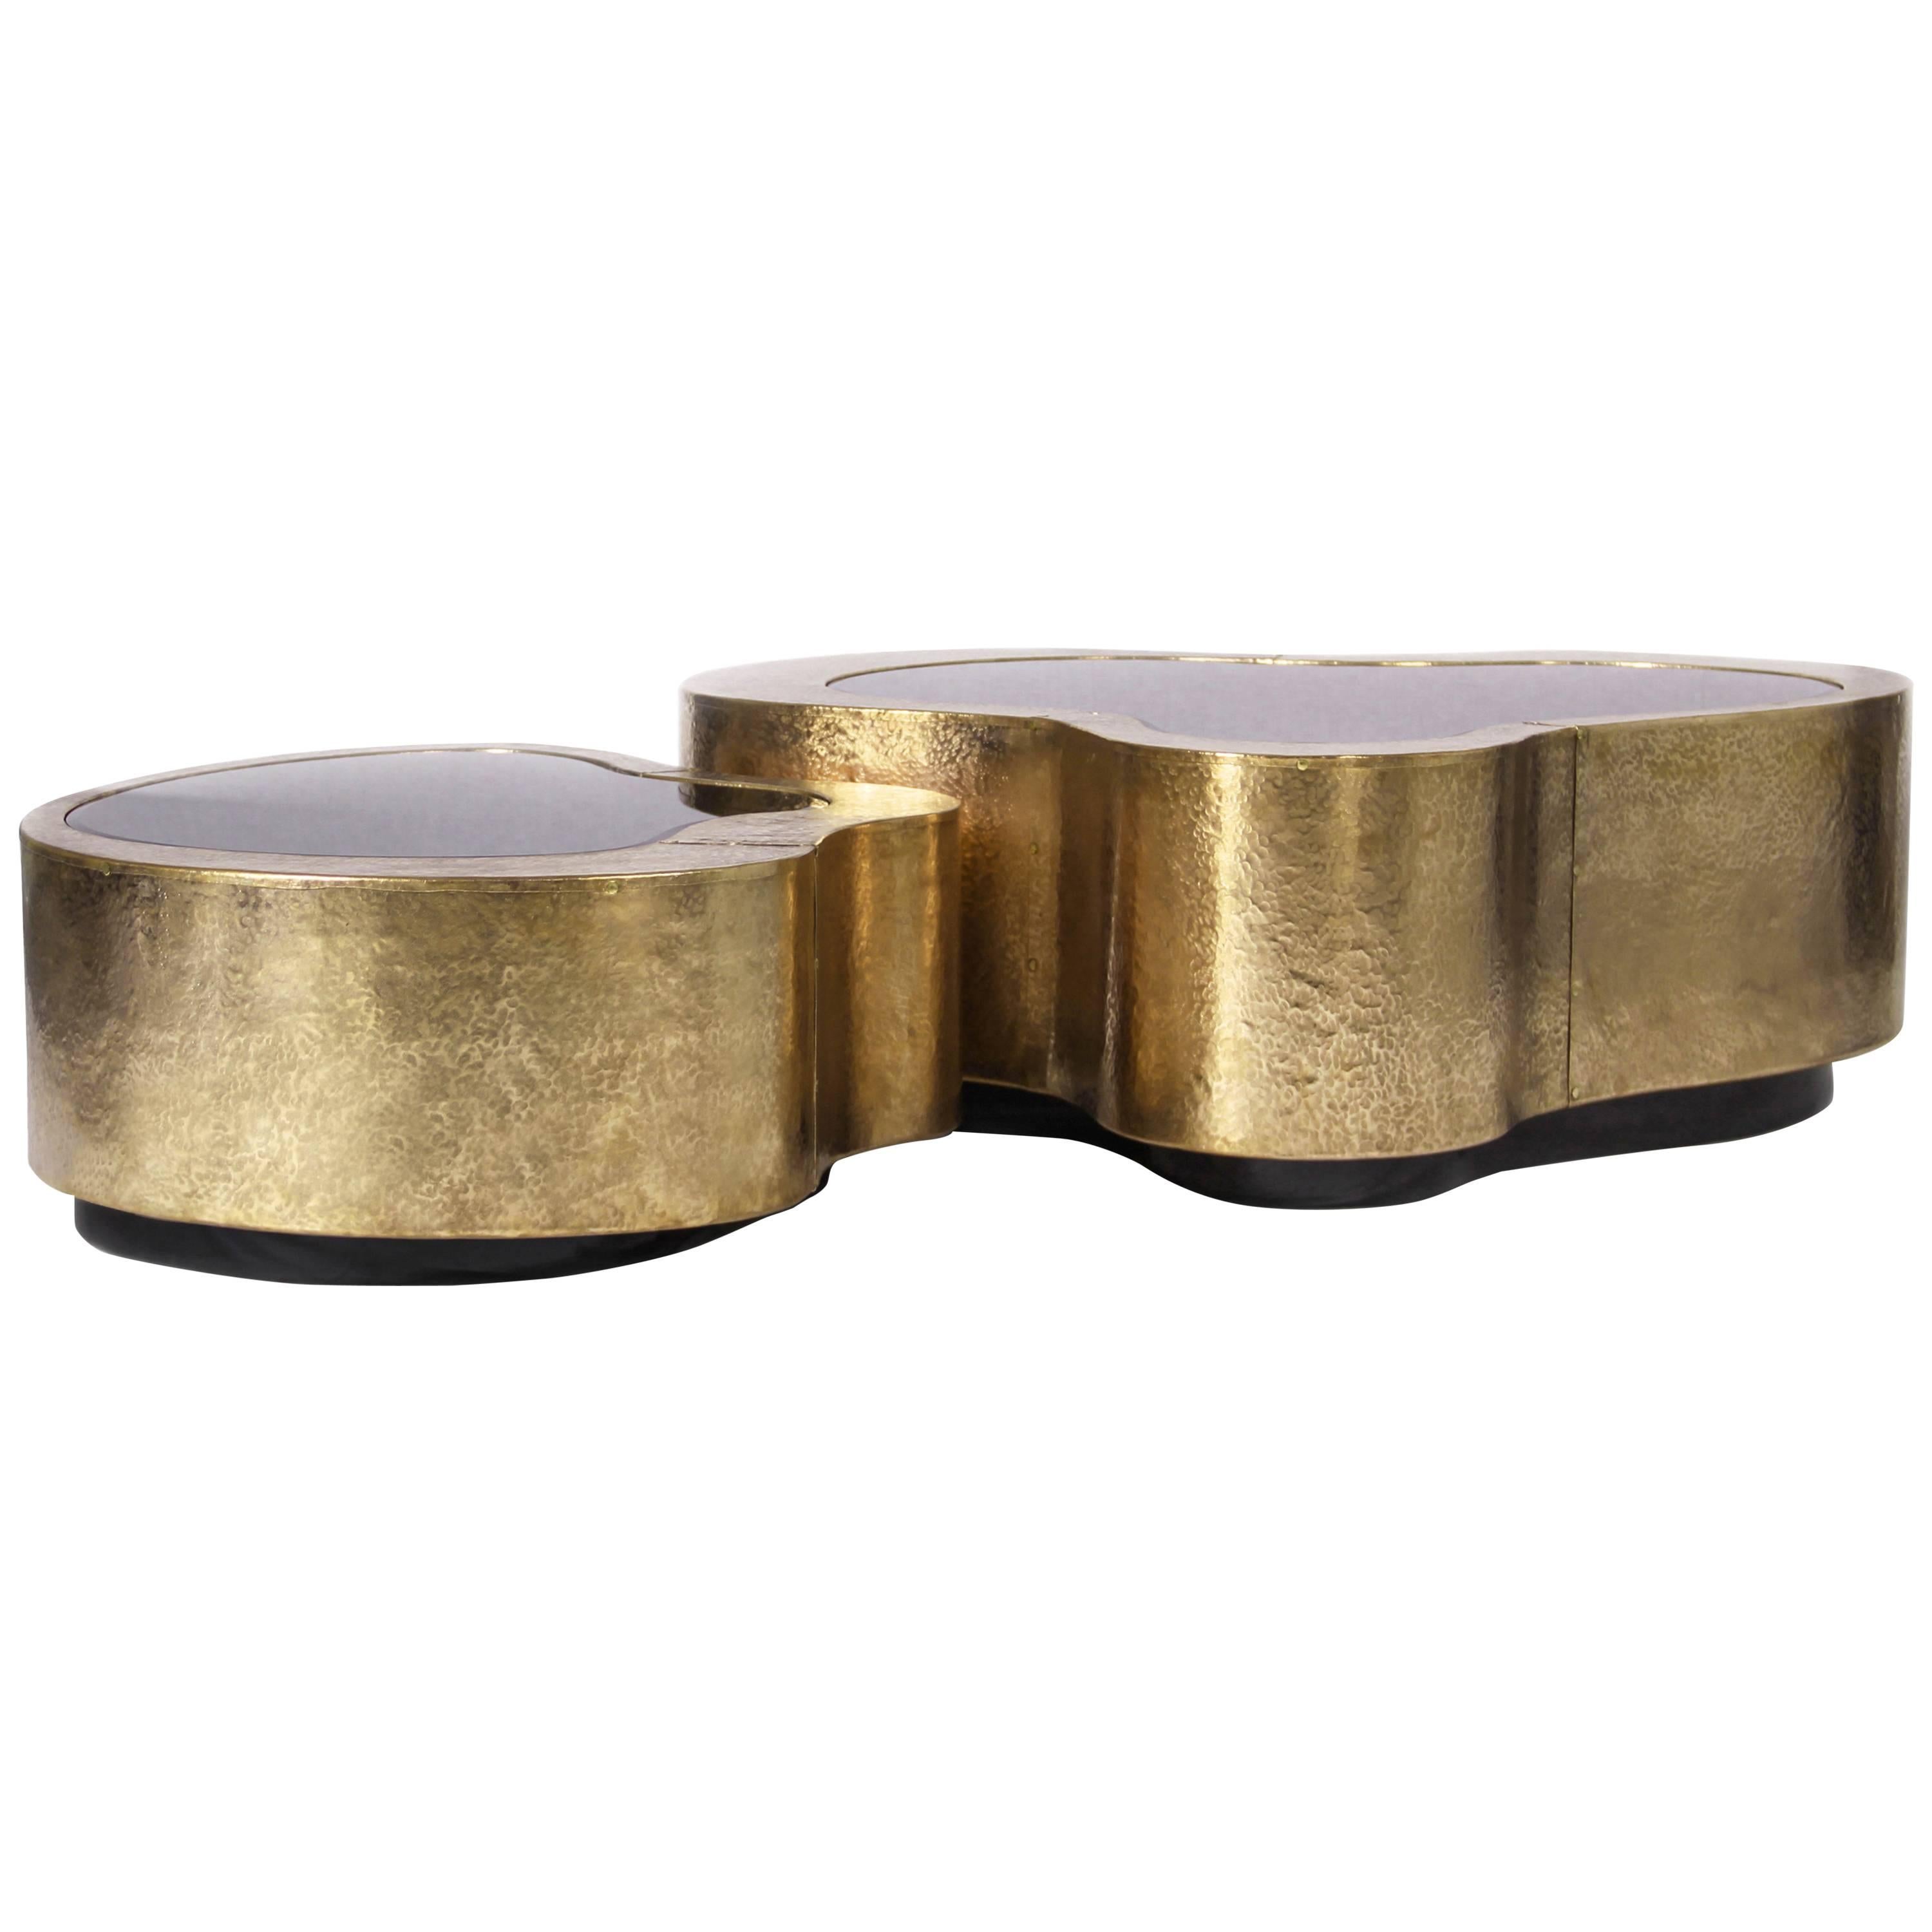 Set of Two Curvilinear Hammered Brass, Glass Center Coffee Tables from Europe